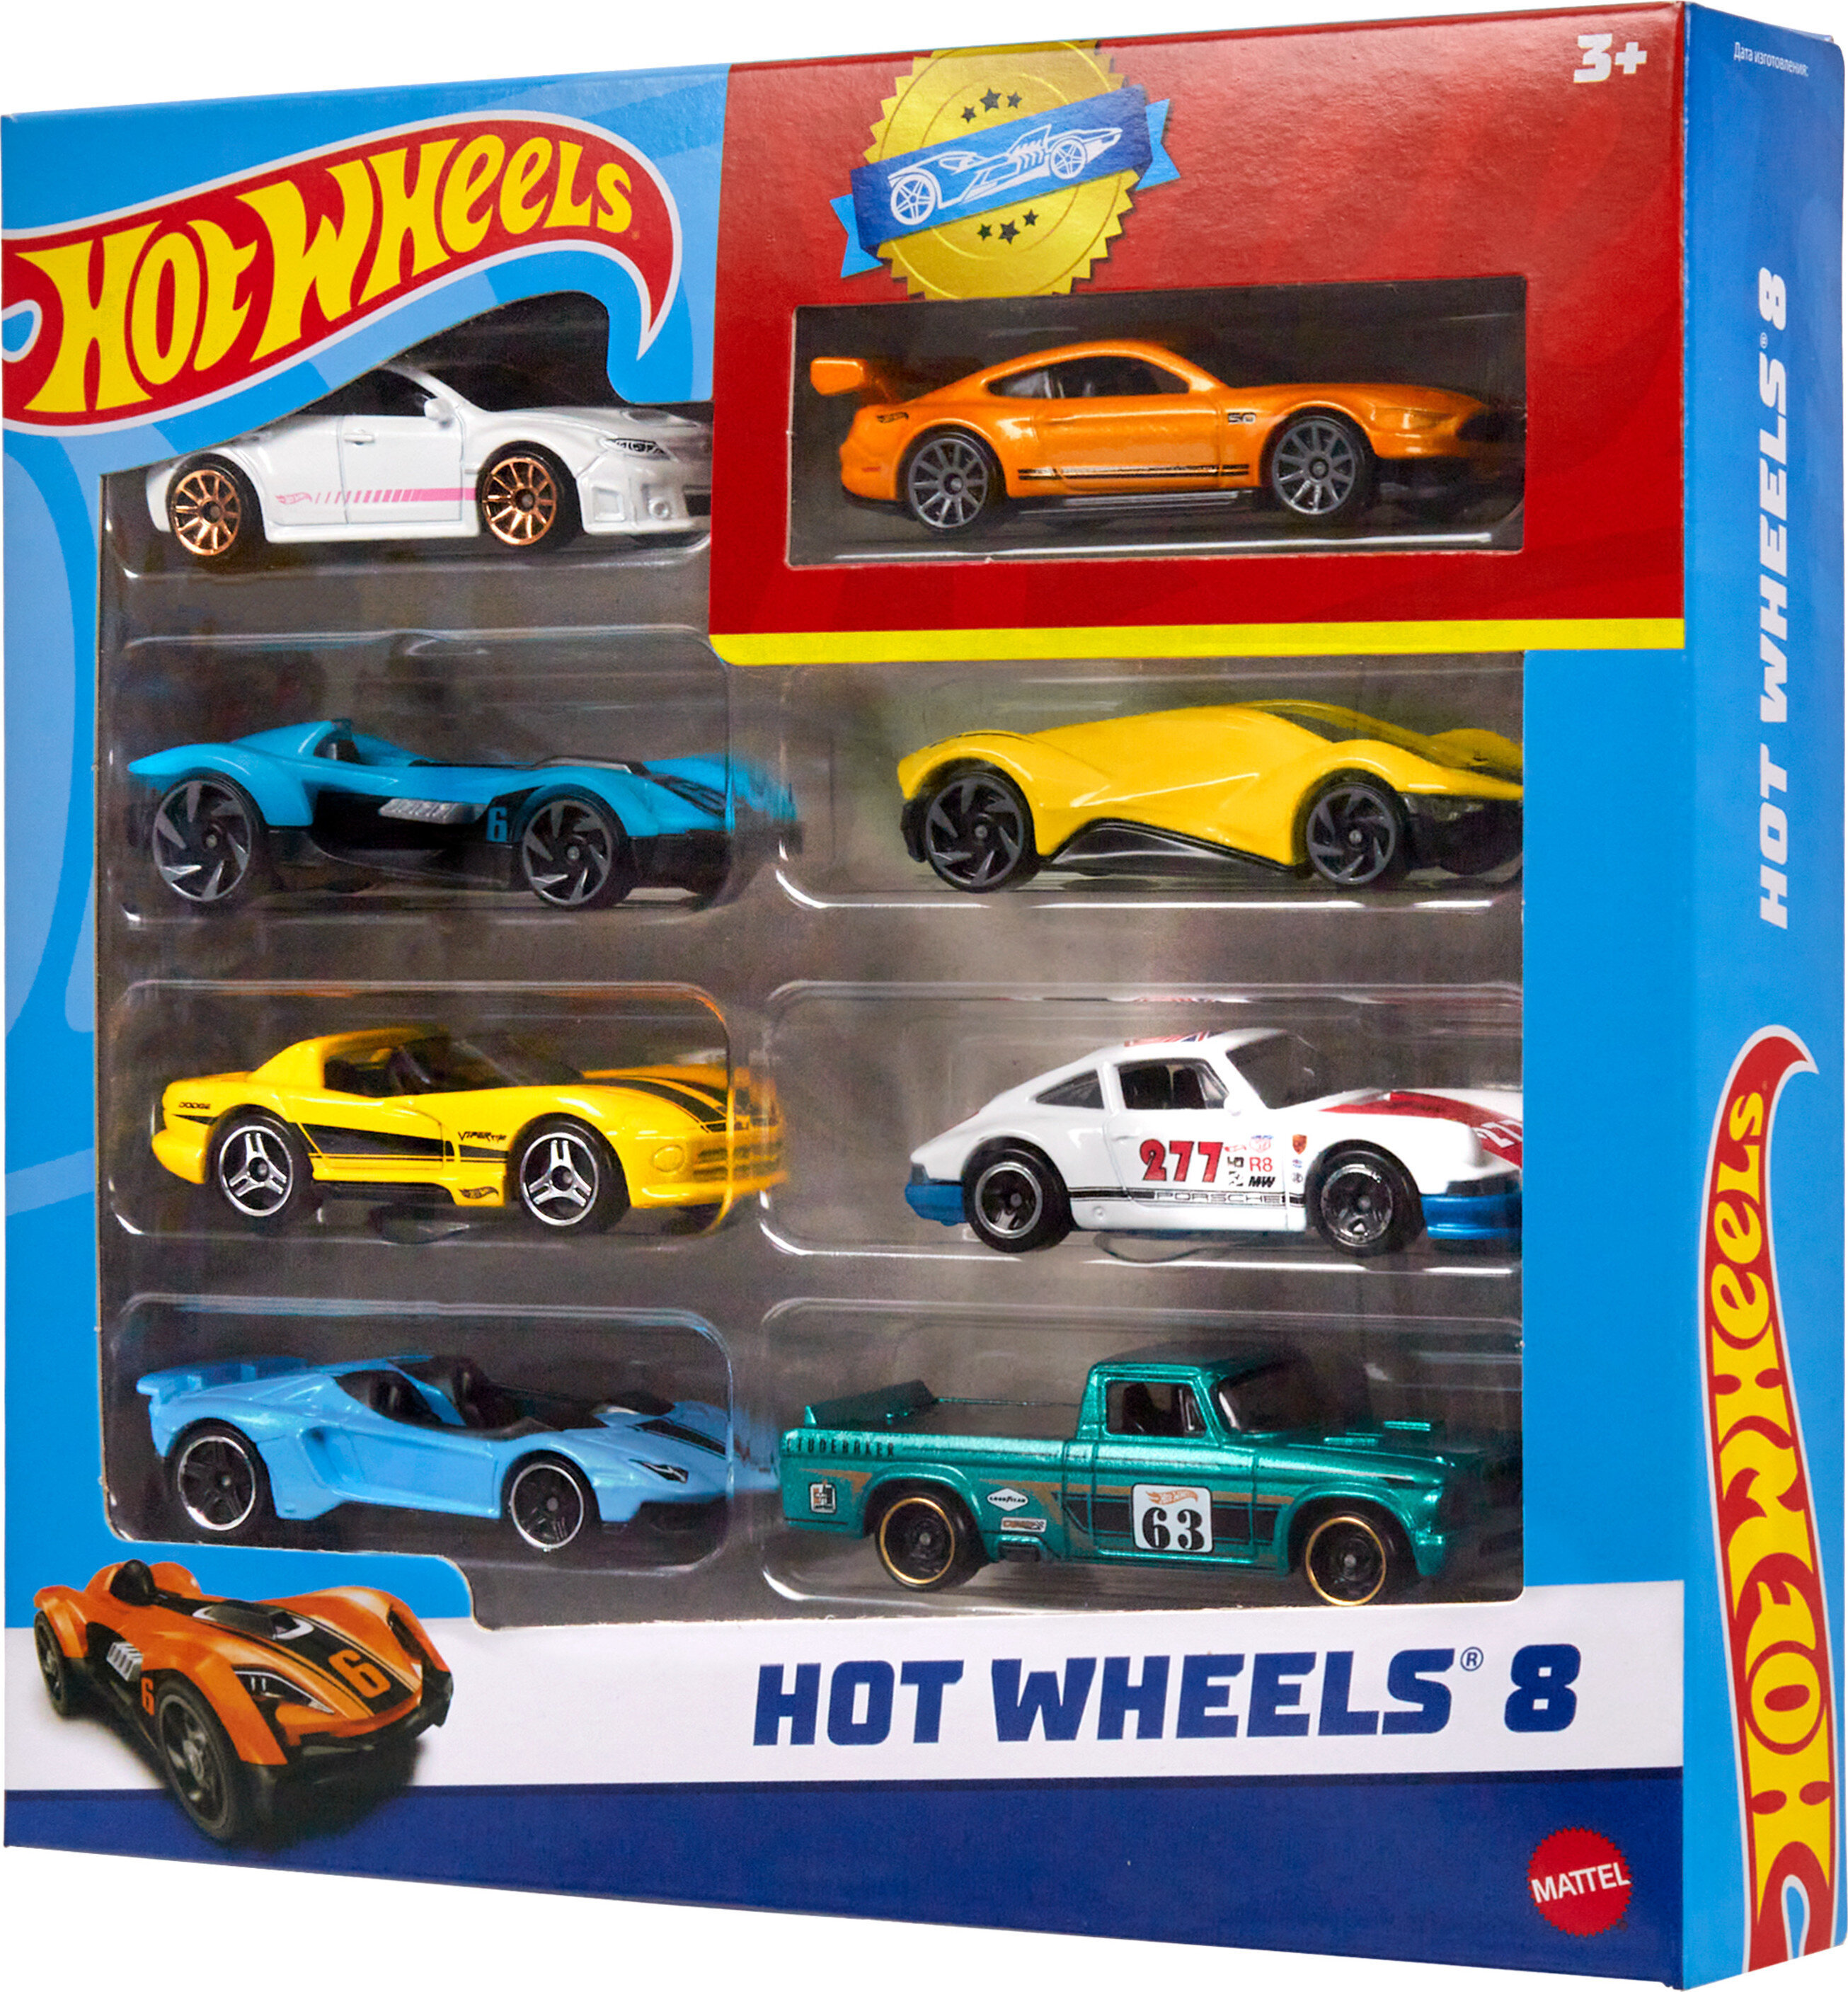 Hot Wheels Set of 8 Basic Toy Cars & Trucks in 1:64 Scale including 1 Exclusive Car, Styles May Vary - image 1 of 5